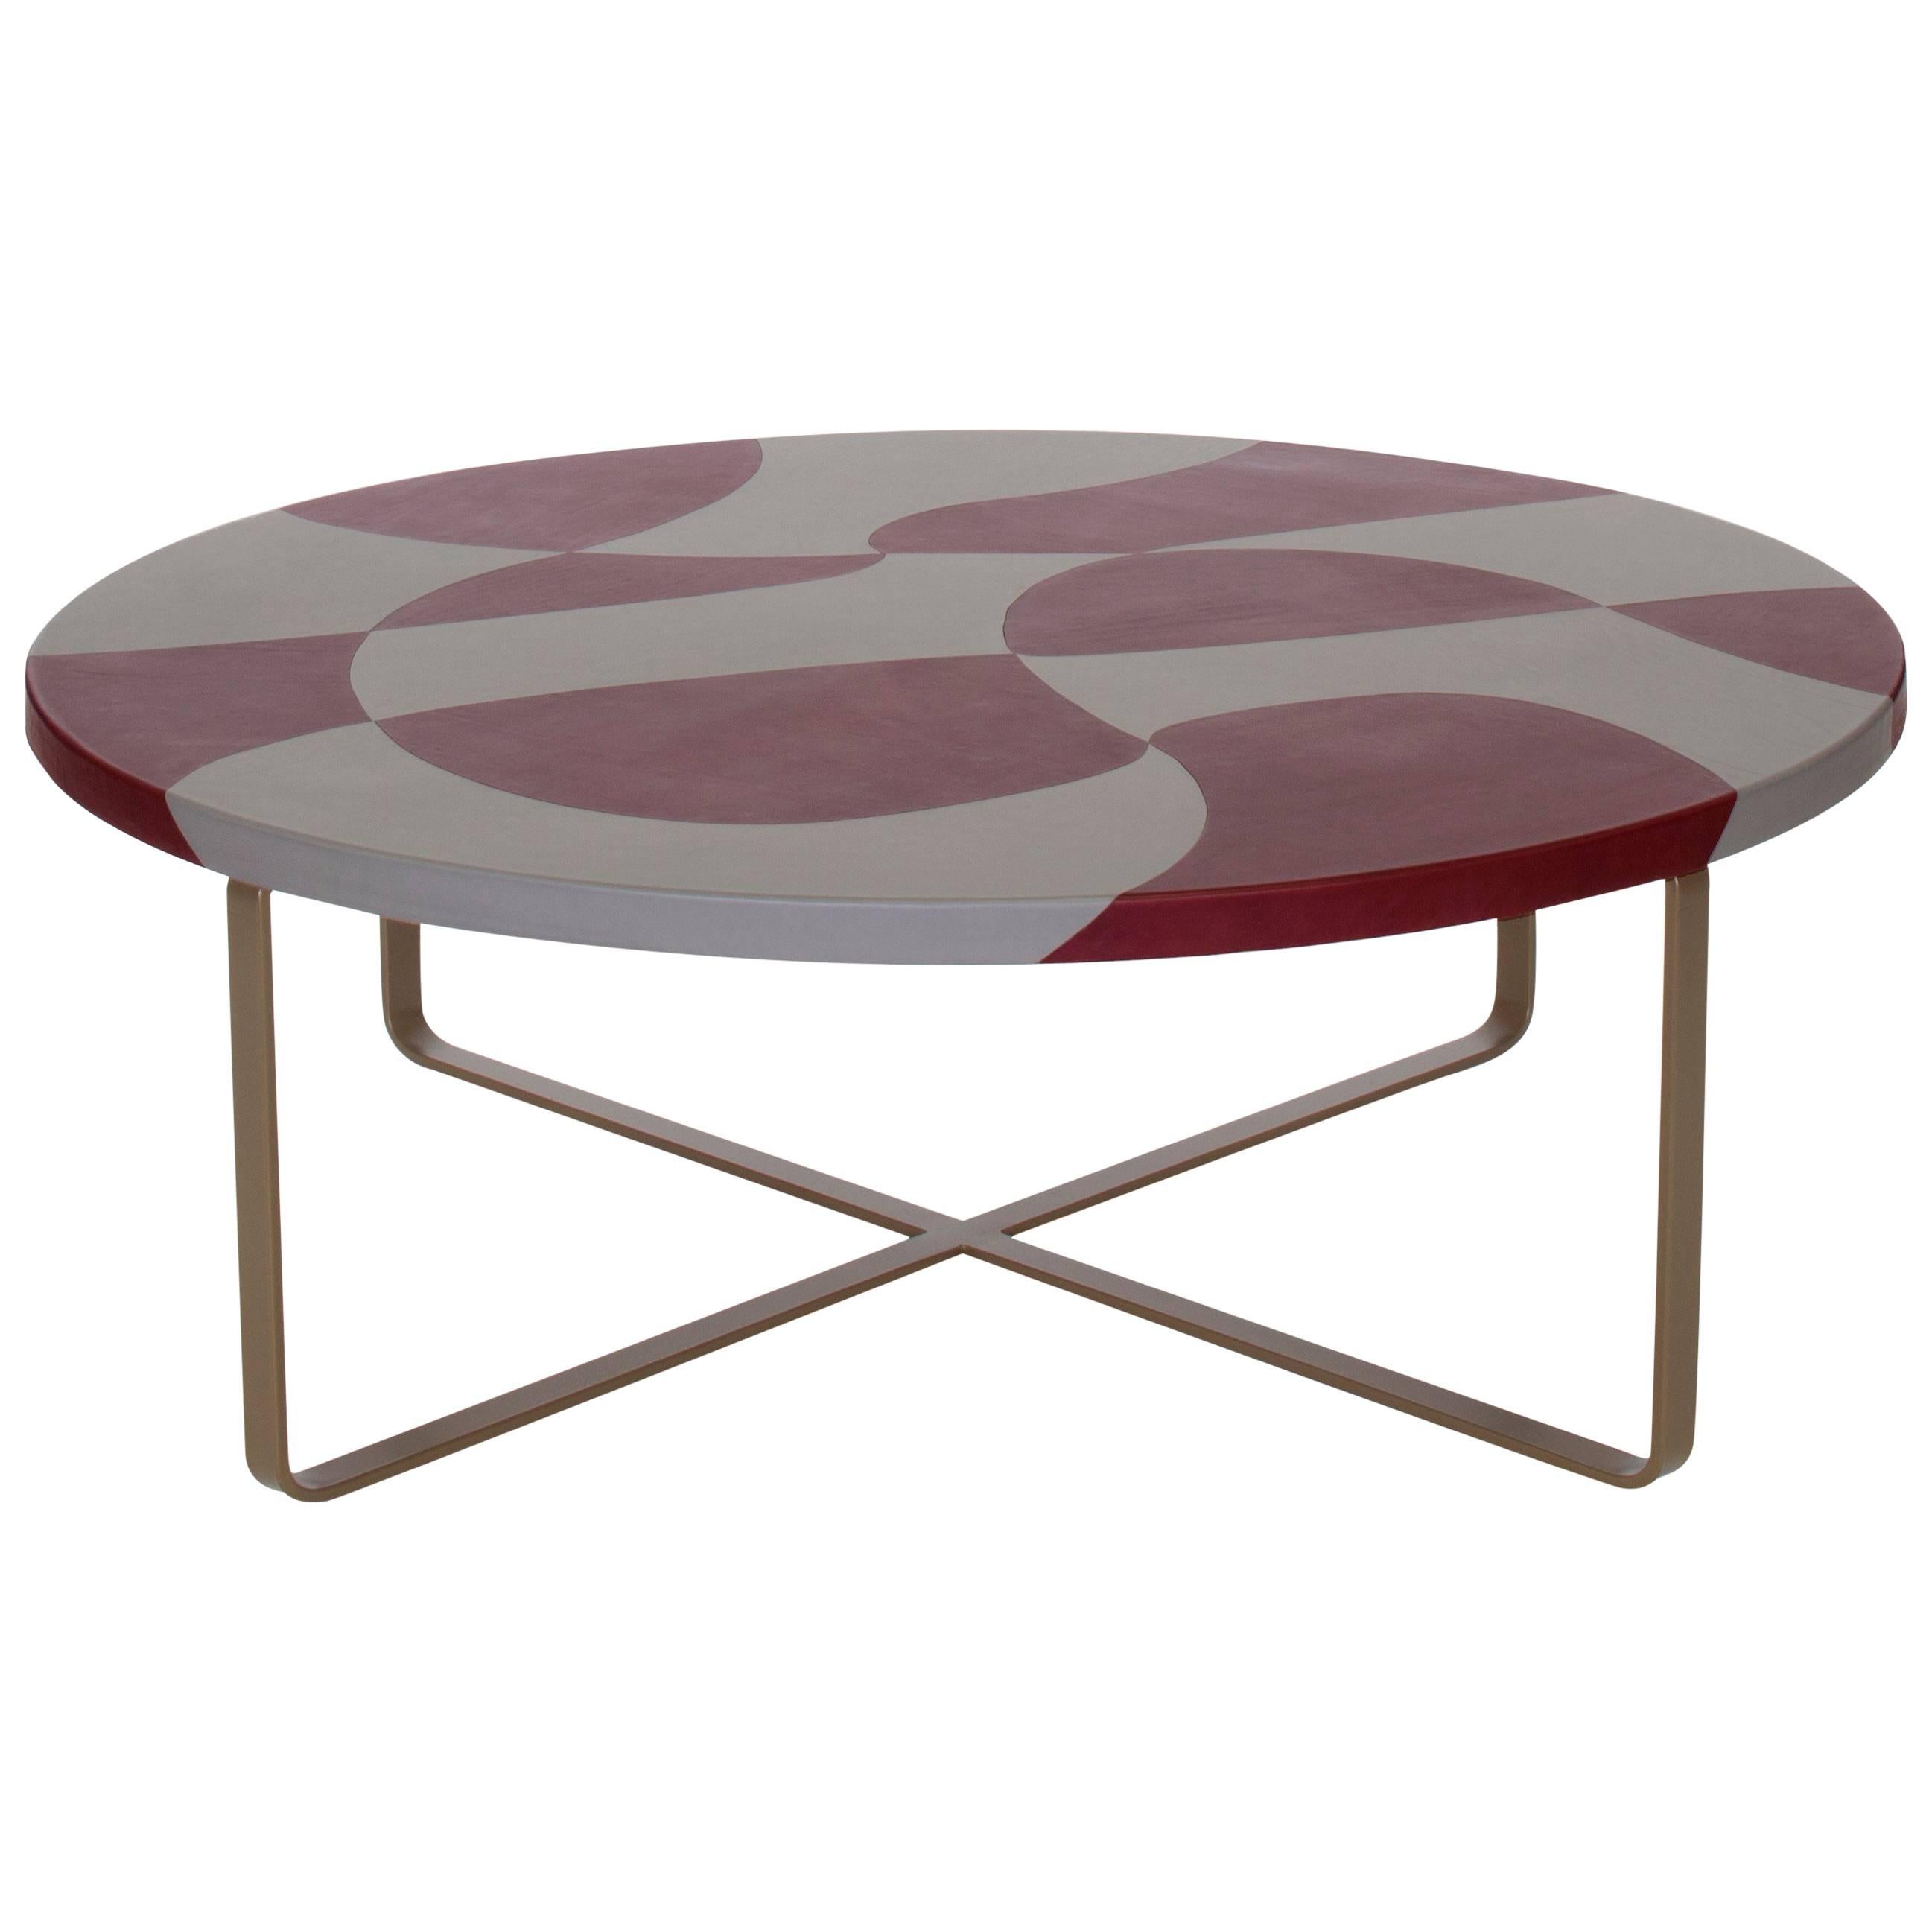 "Maupiti" Inlaid Leather Top Coffee Table by Nestor Perkal for Oscar Maschera For Sale